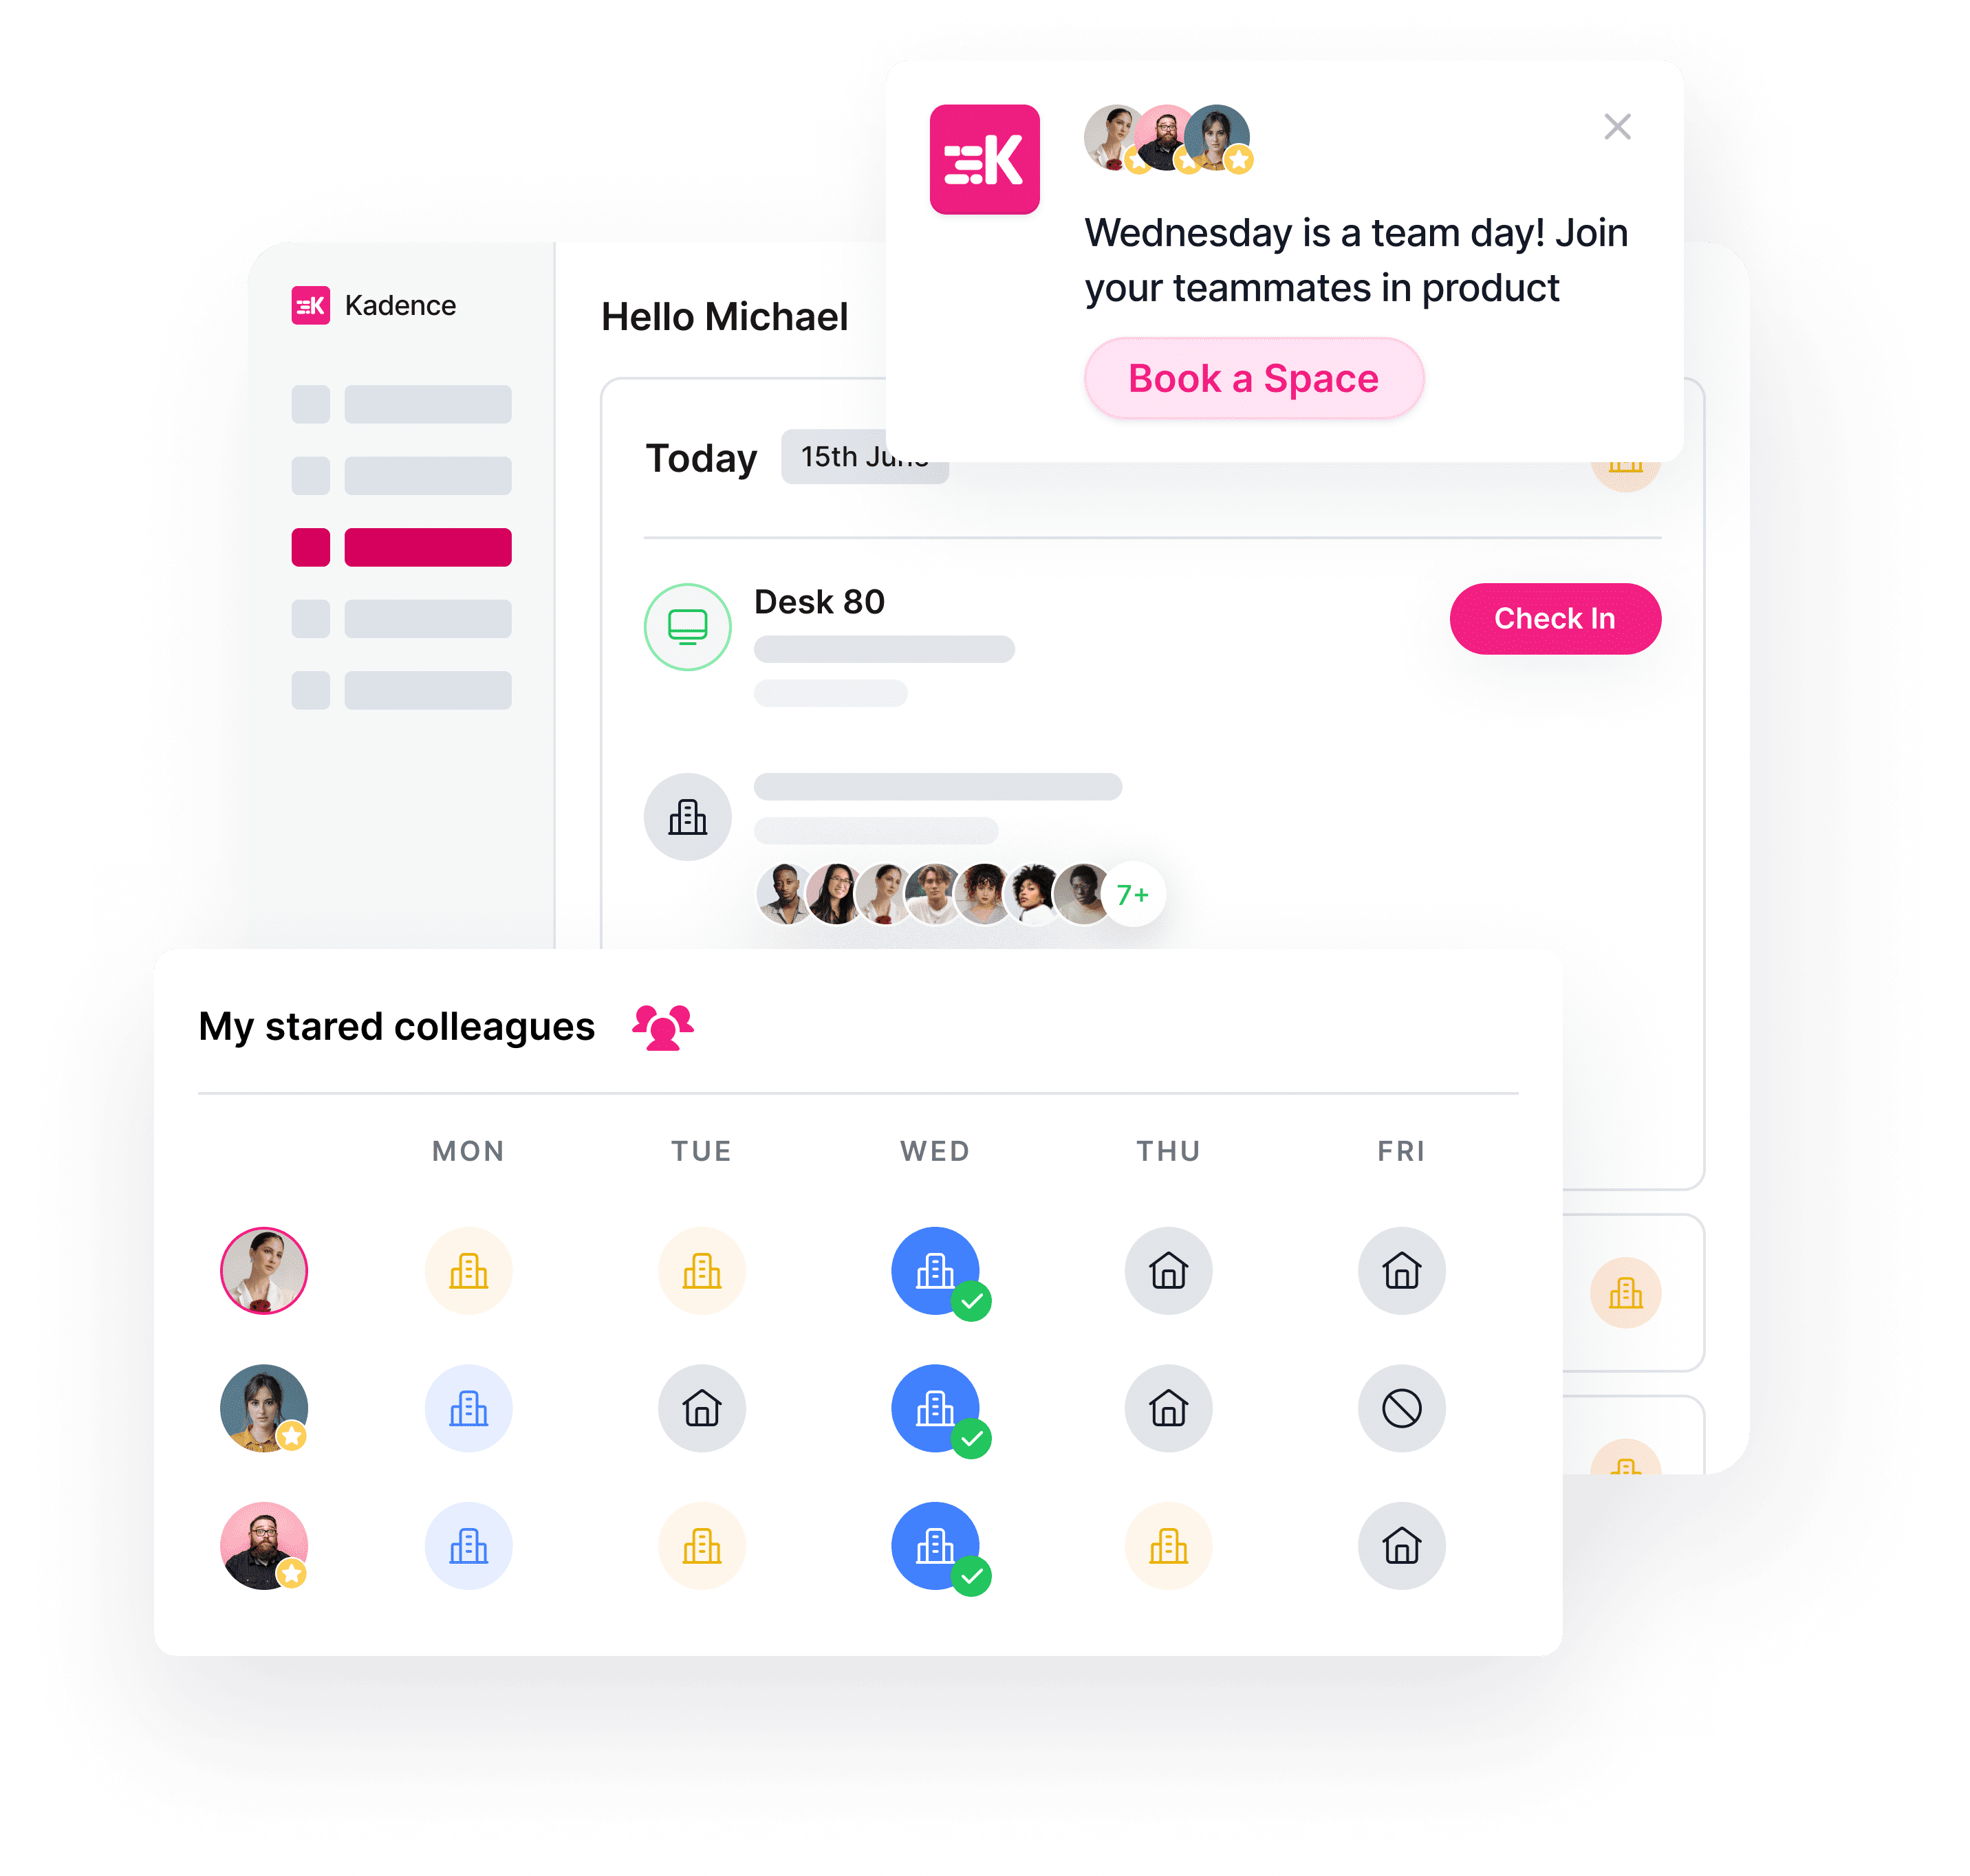 Team Coordination Software that brings your teams together at the right times to connect